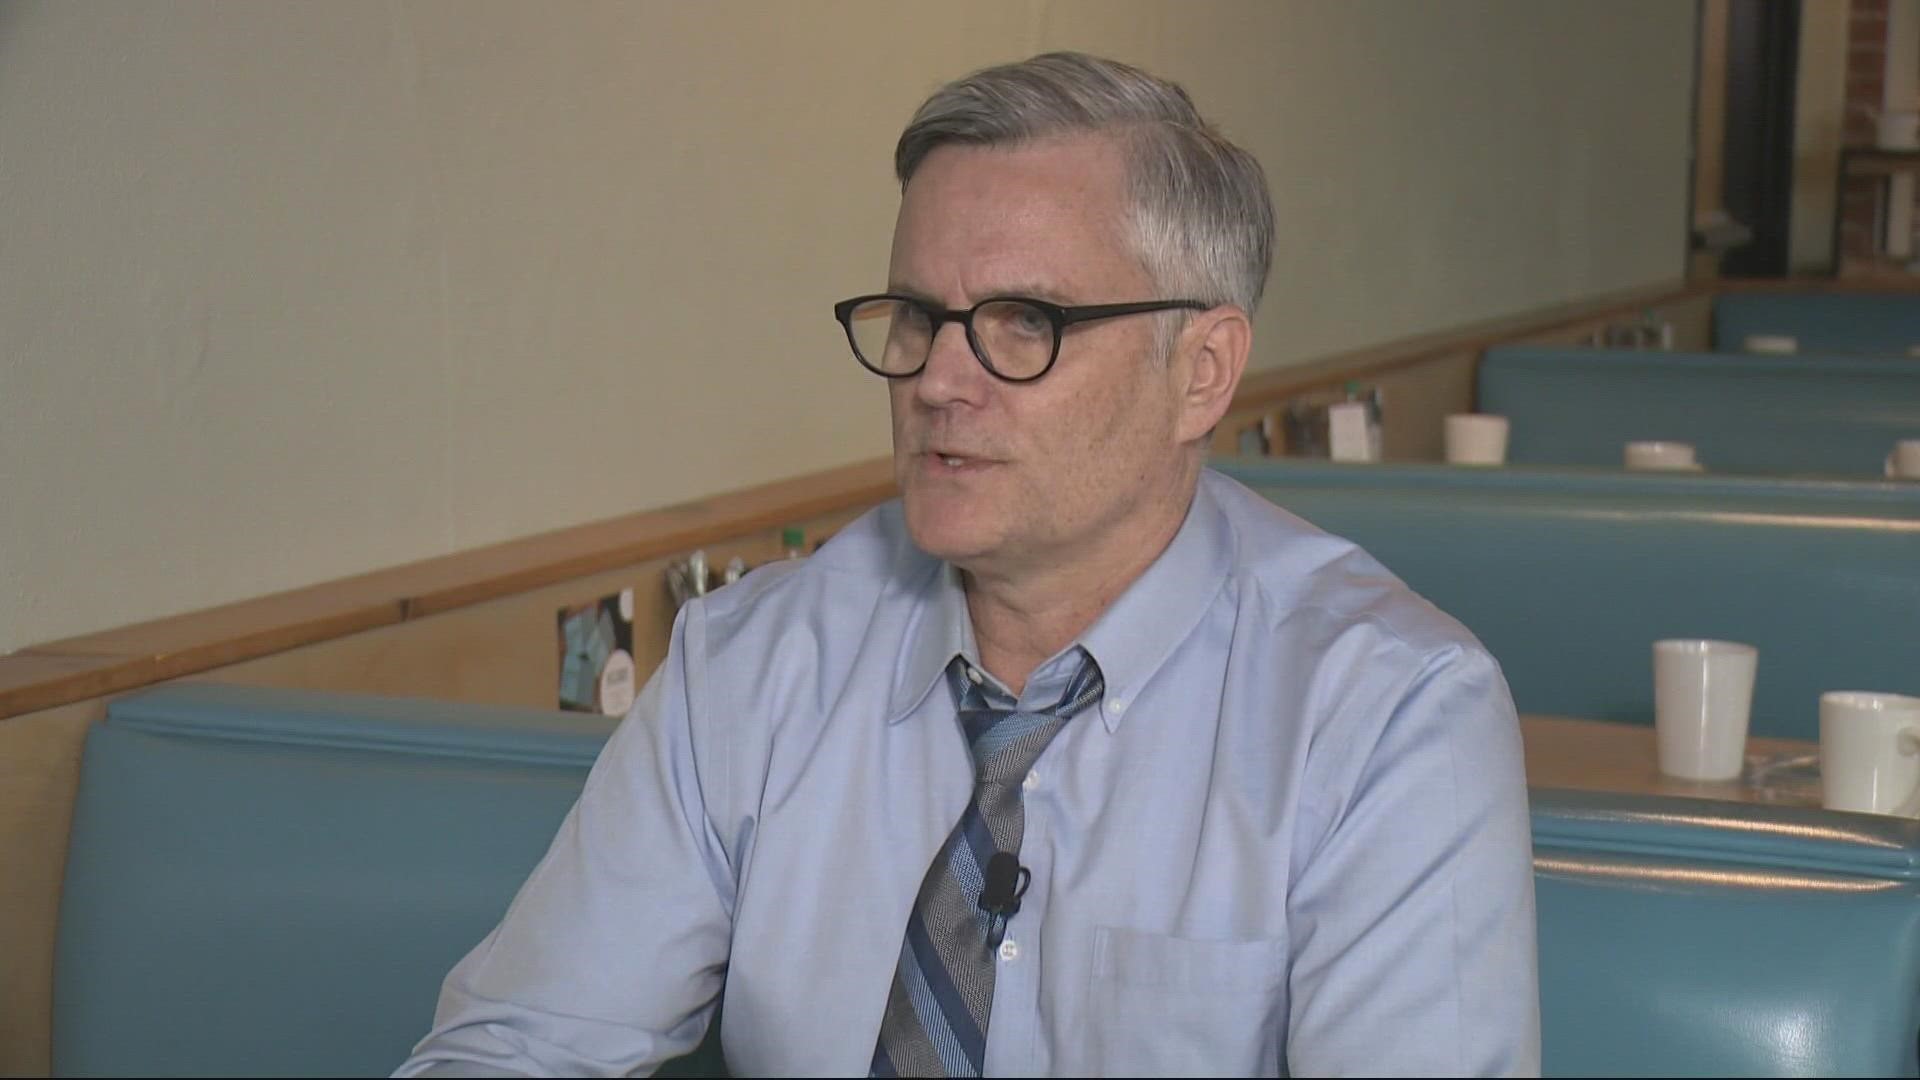 The former Portland Mayor joined current Mayor Ted Wheeler's staff in early 2021. He resigned Tuesday, citing health challenges.